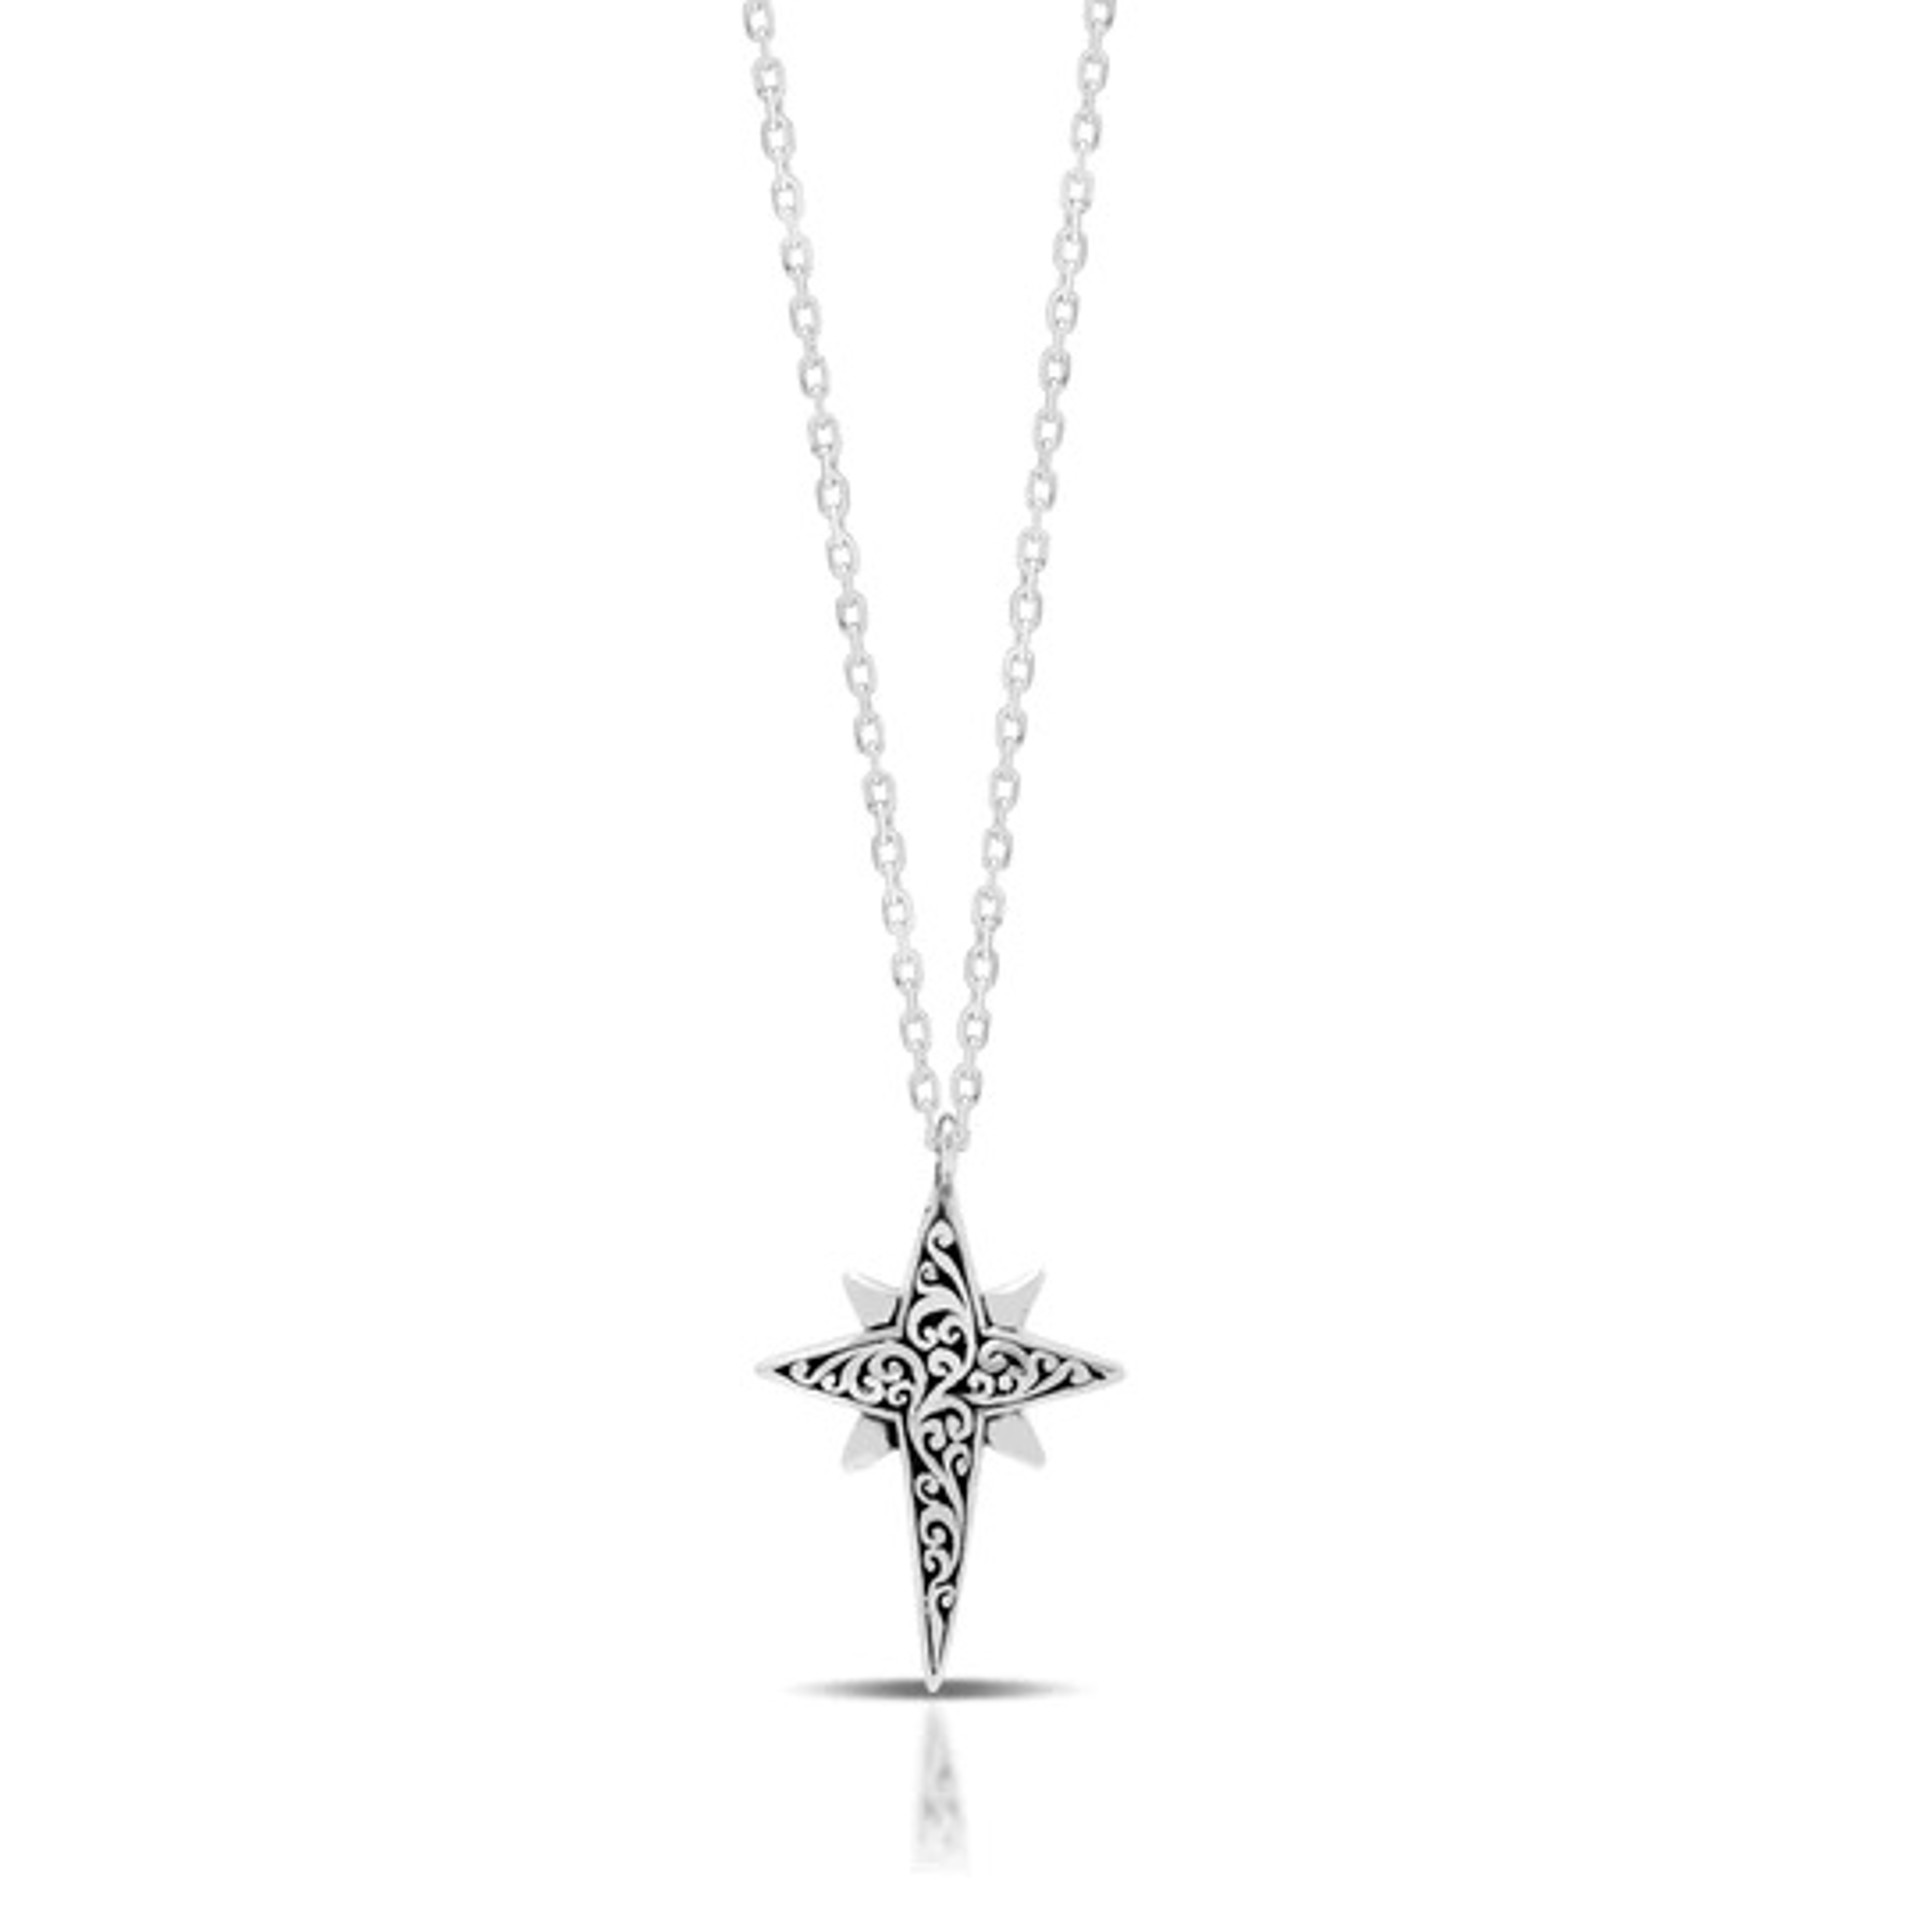 1083 Elongated Star Bright Pendant Necklace (SO) by Lois Hill